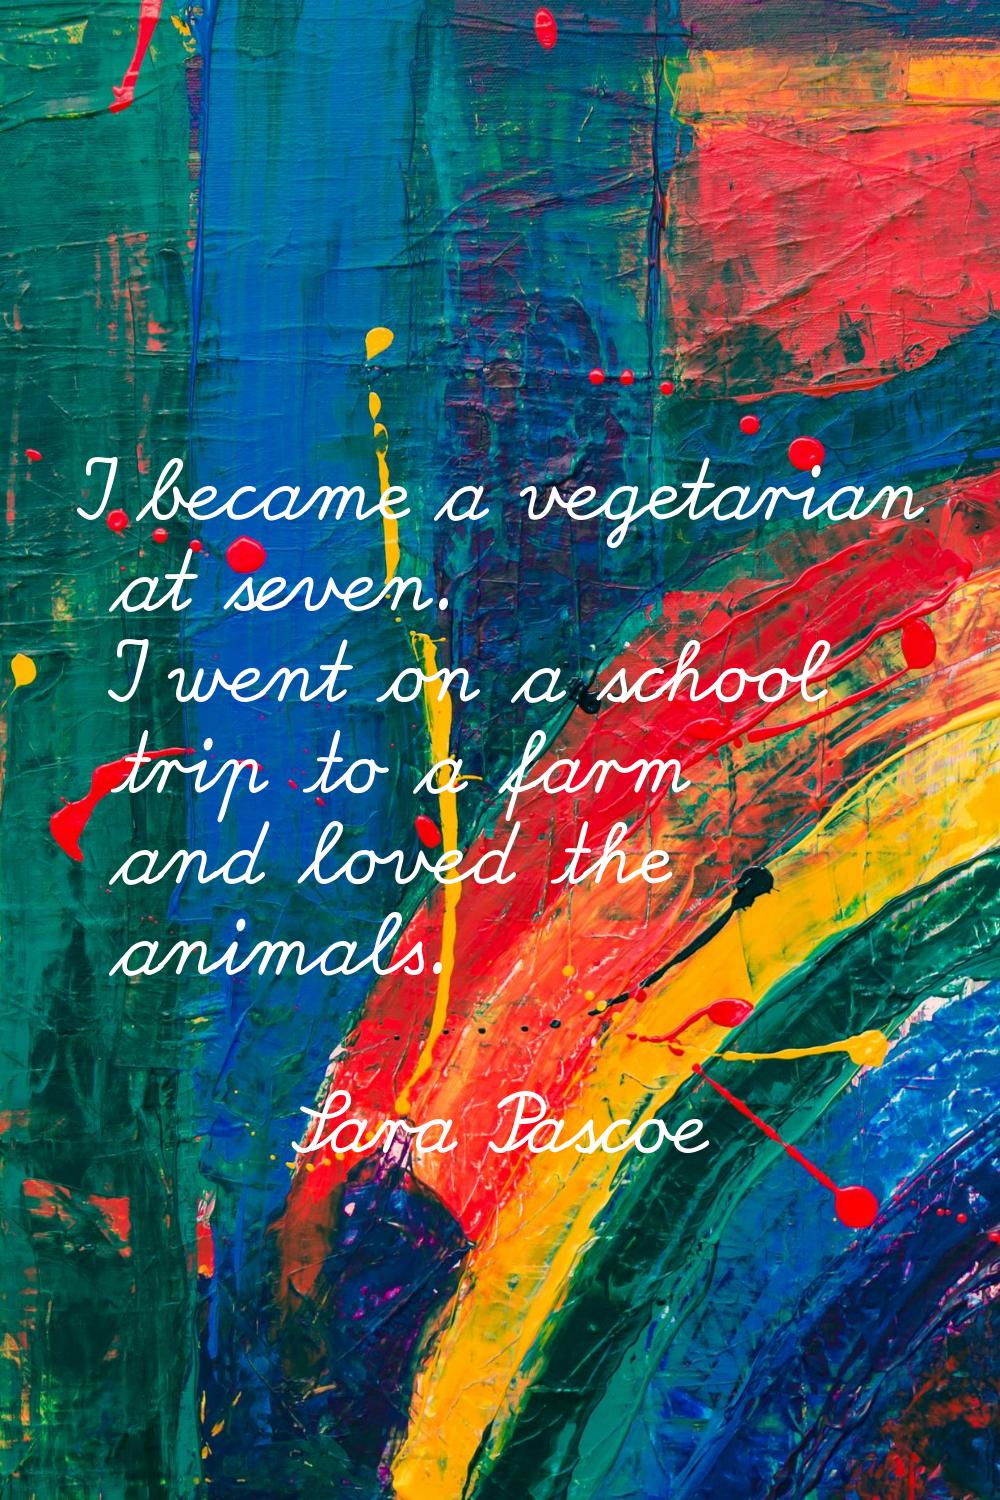 I became a vegetarian at seven. I went on a school trip to a farm and loved the animals.